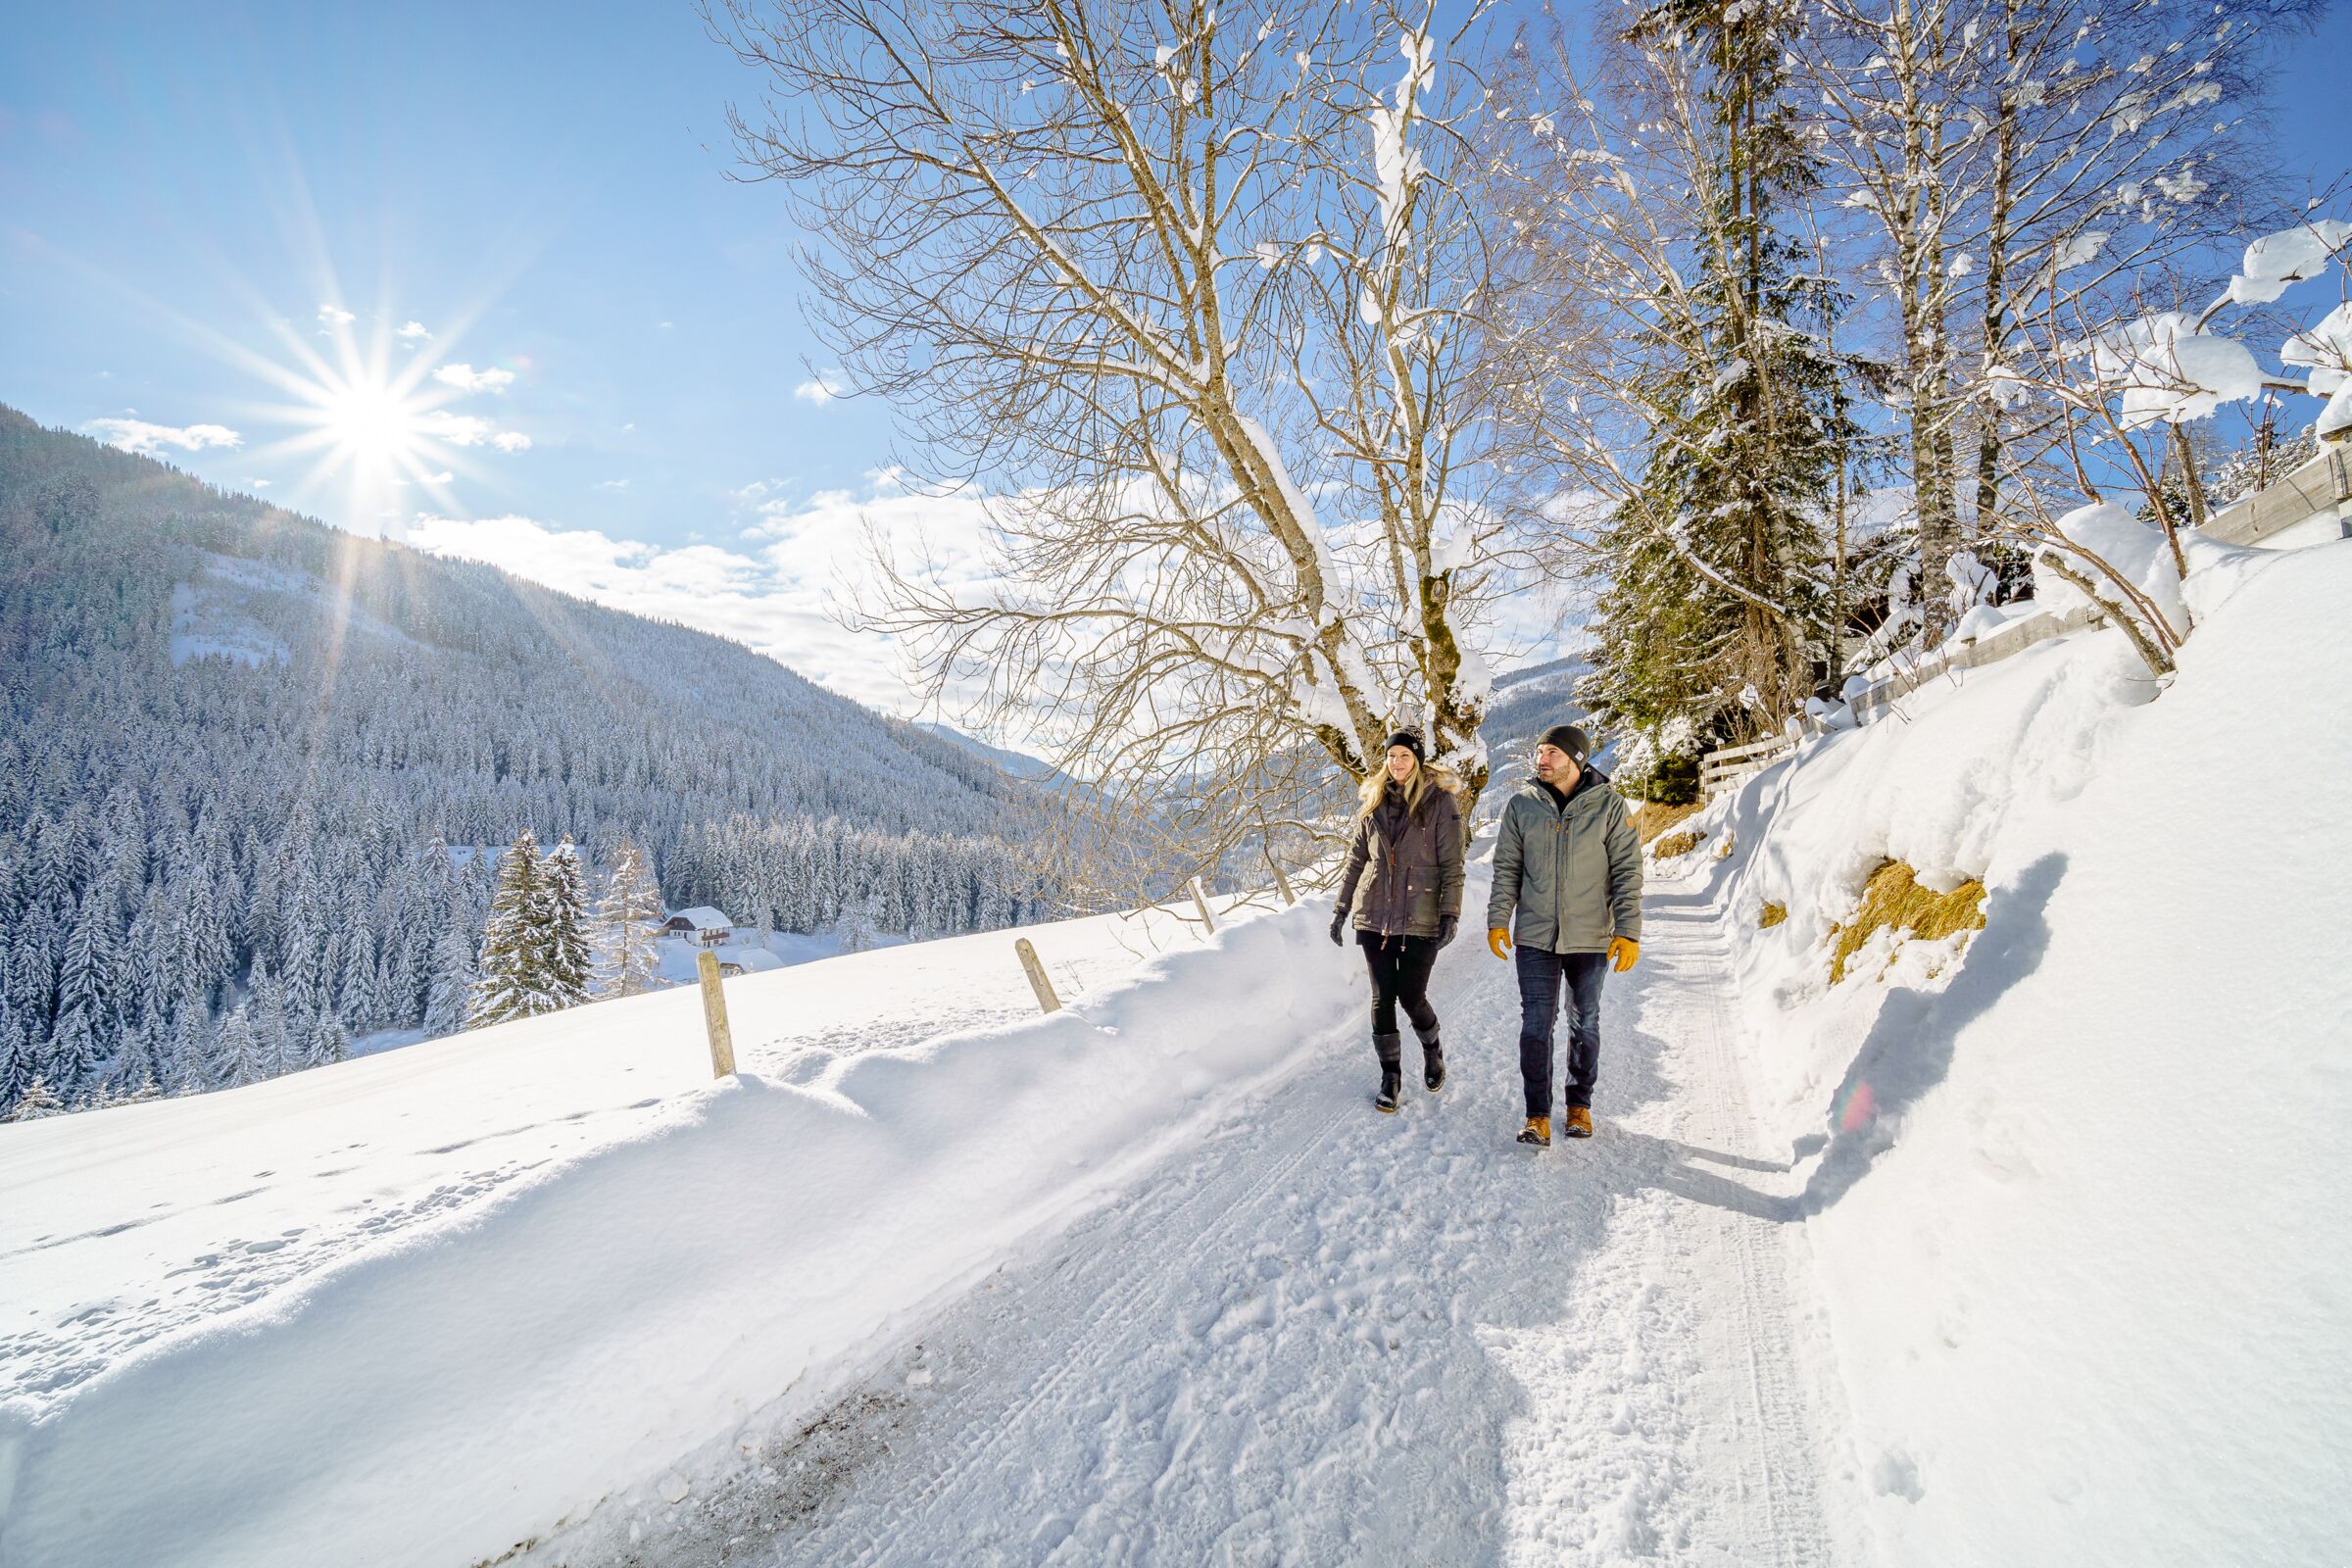 A couple taking a winter walk in Bad Kleinkirchen in the snow-covered nature.